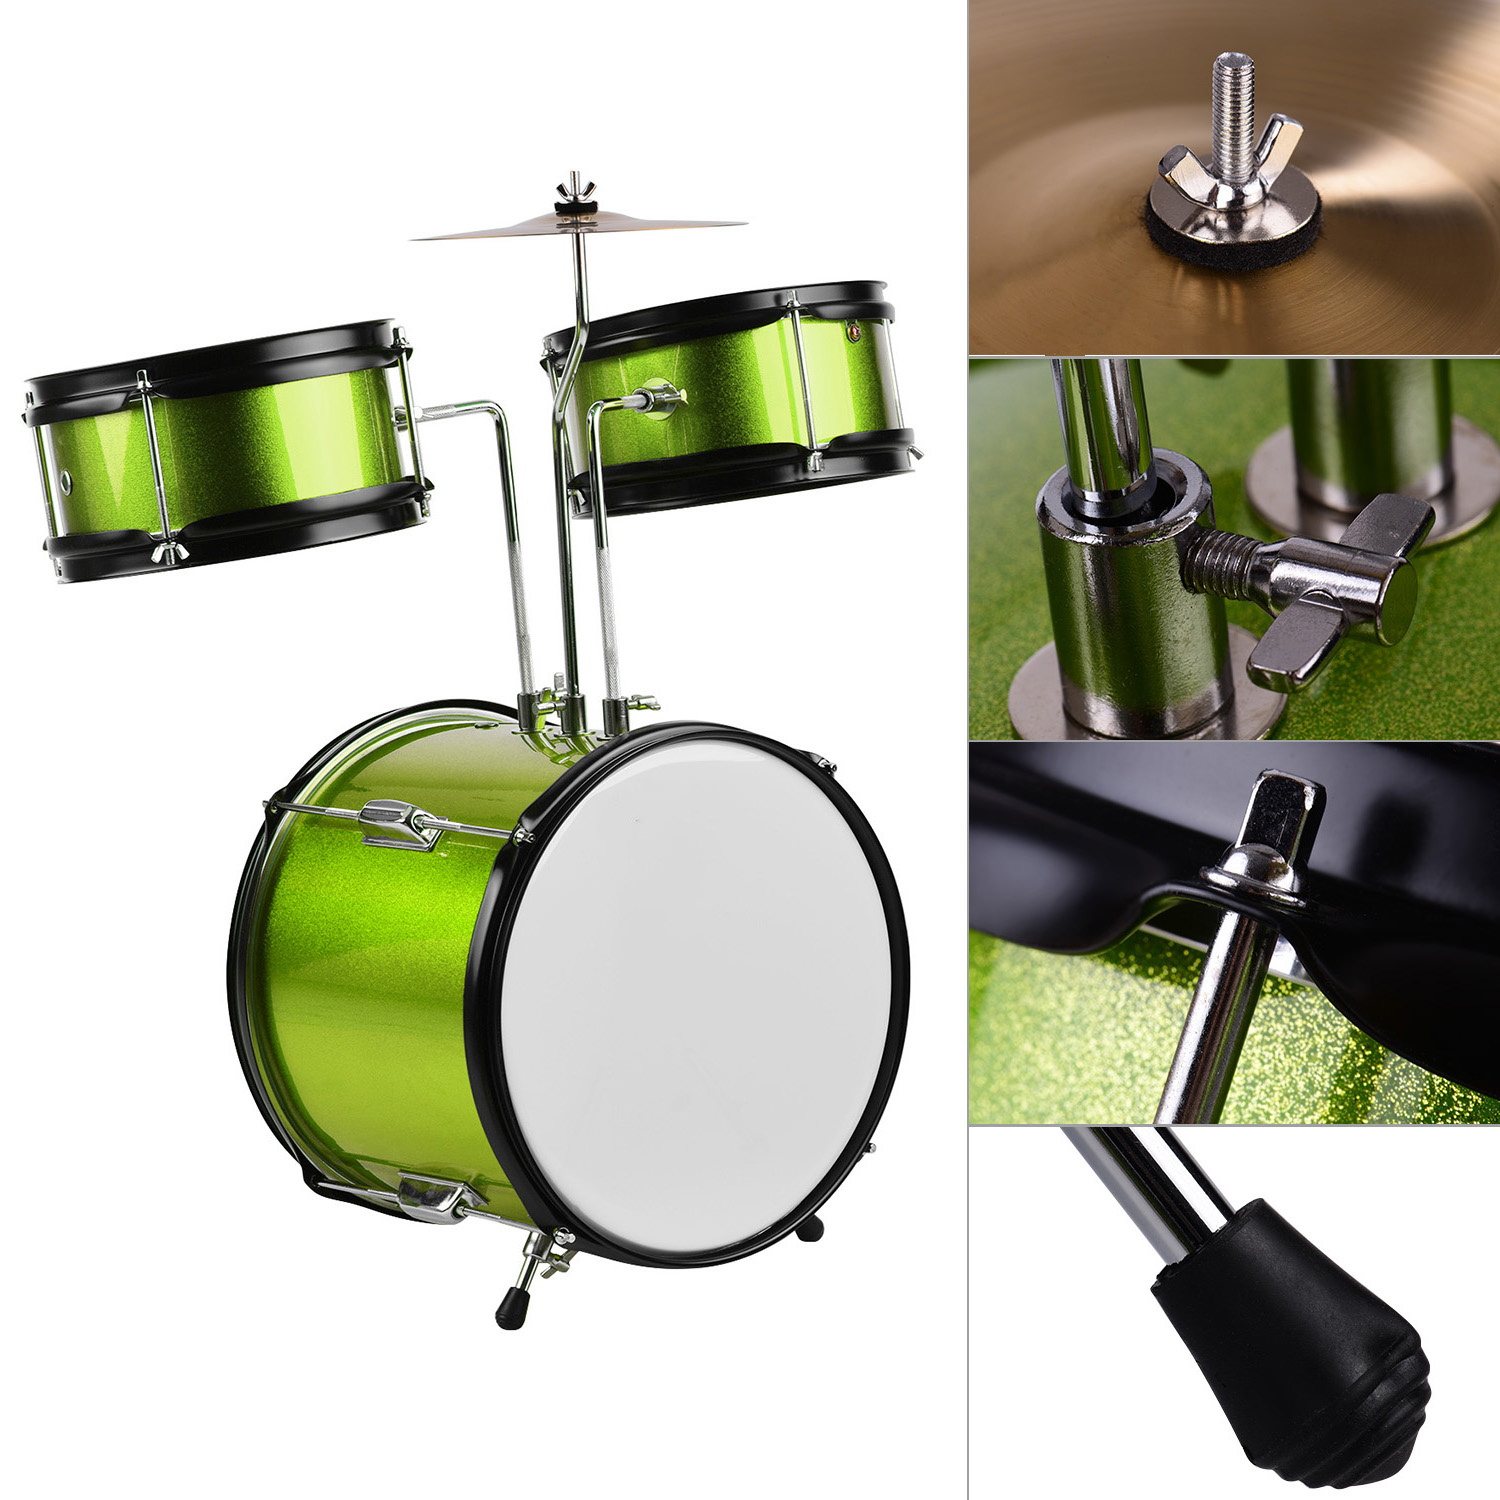 Kids Children Junior Beginners 3-Piece Drum Set Drums Kit Percussion Musical Instrument with Cymbal Drumsticks Adjustable Stool